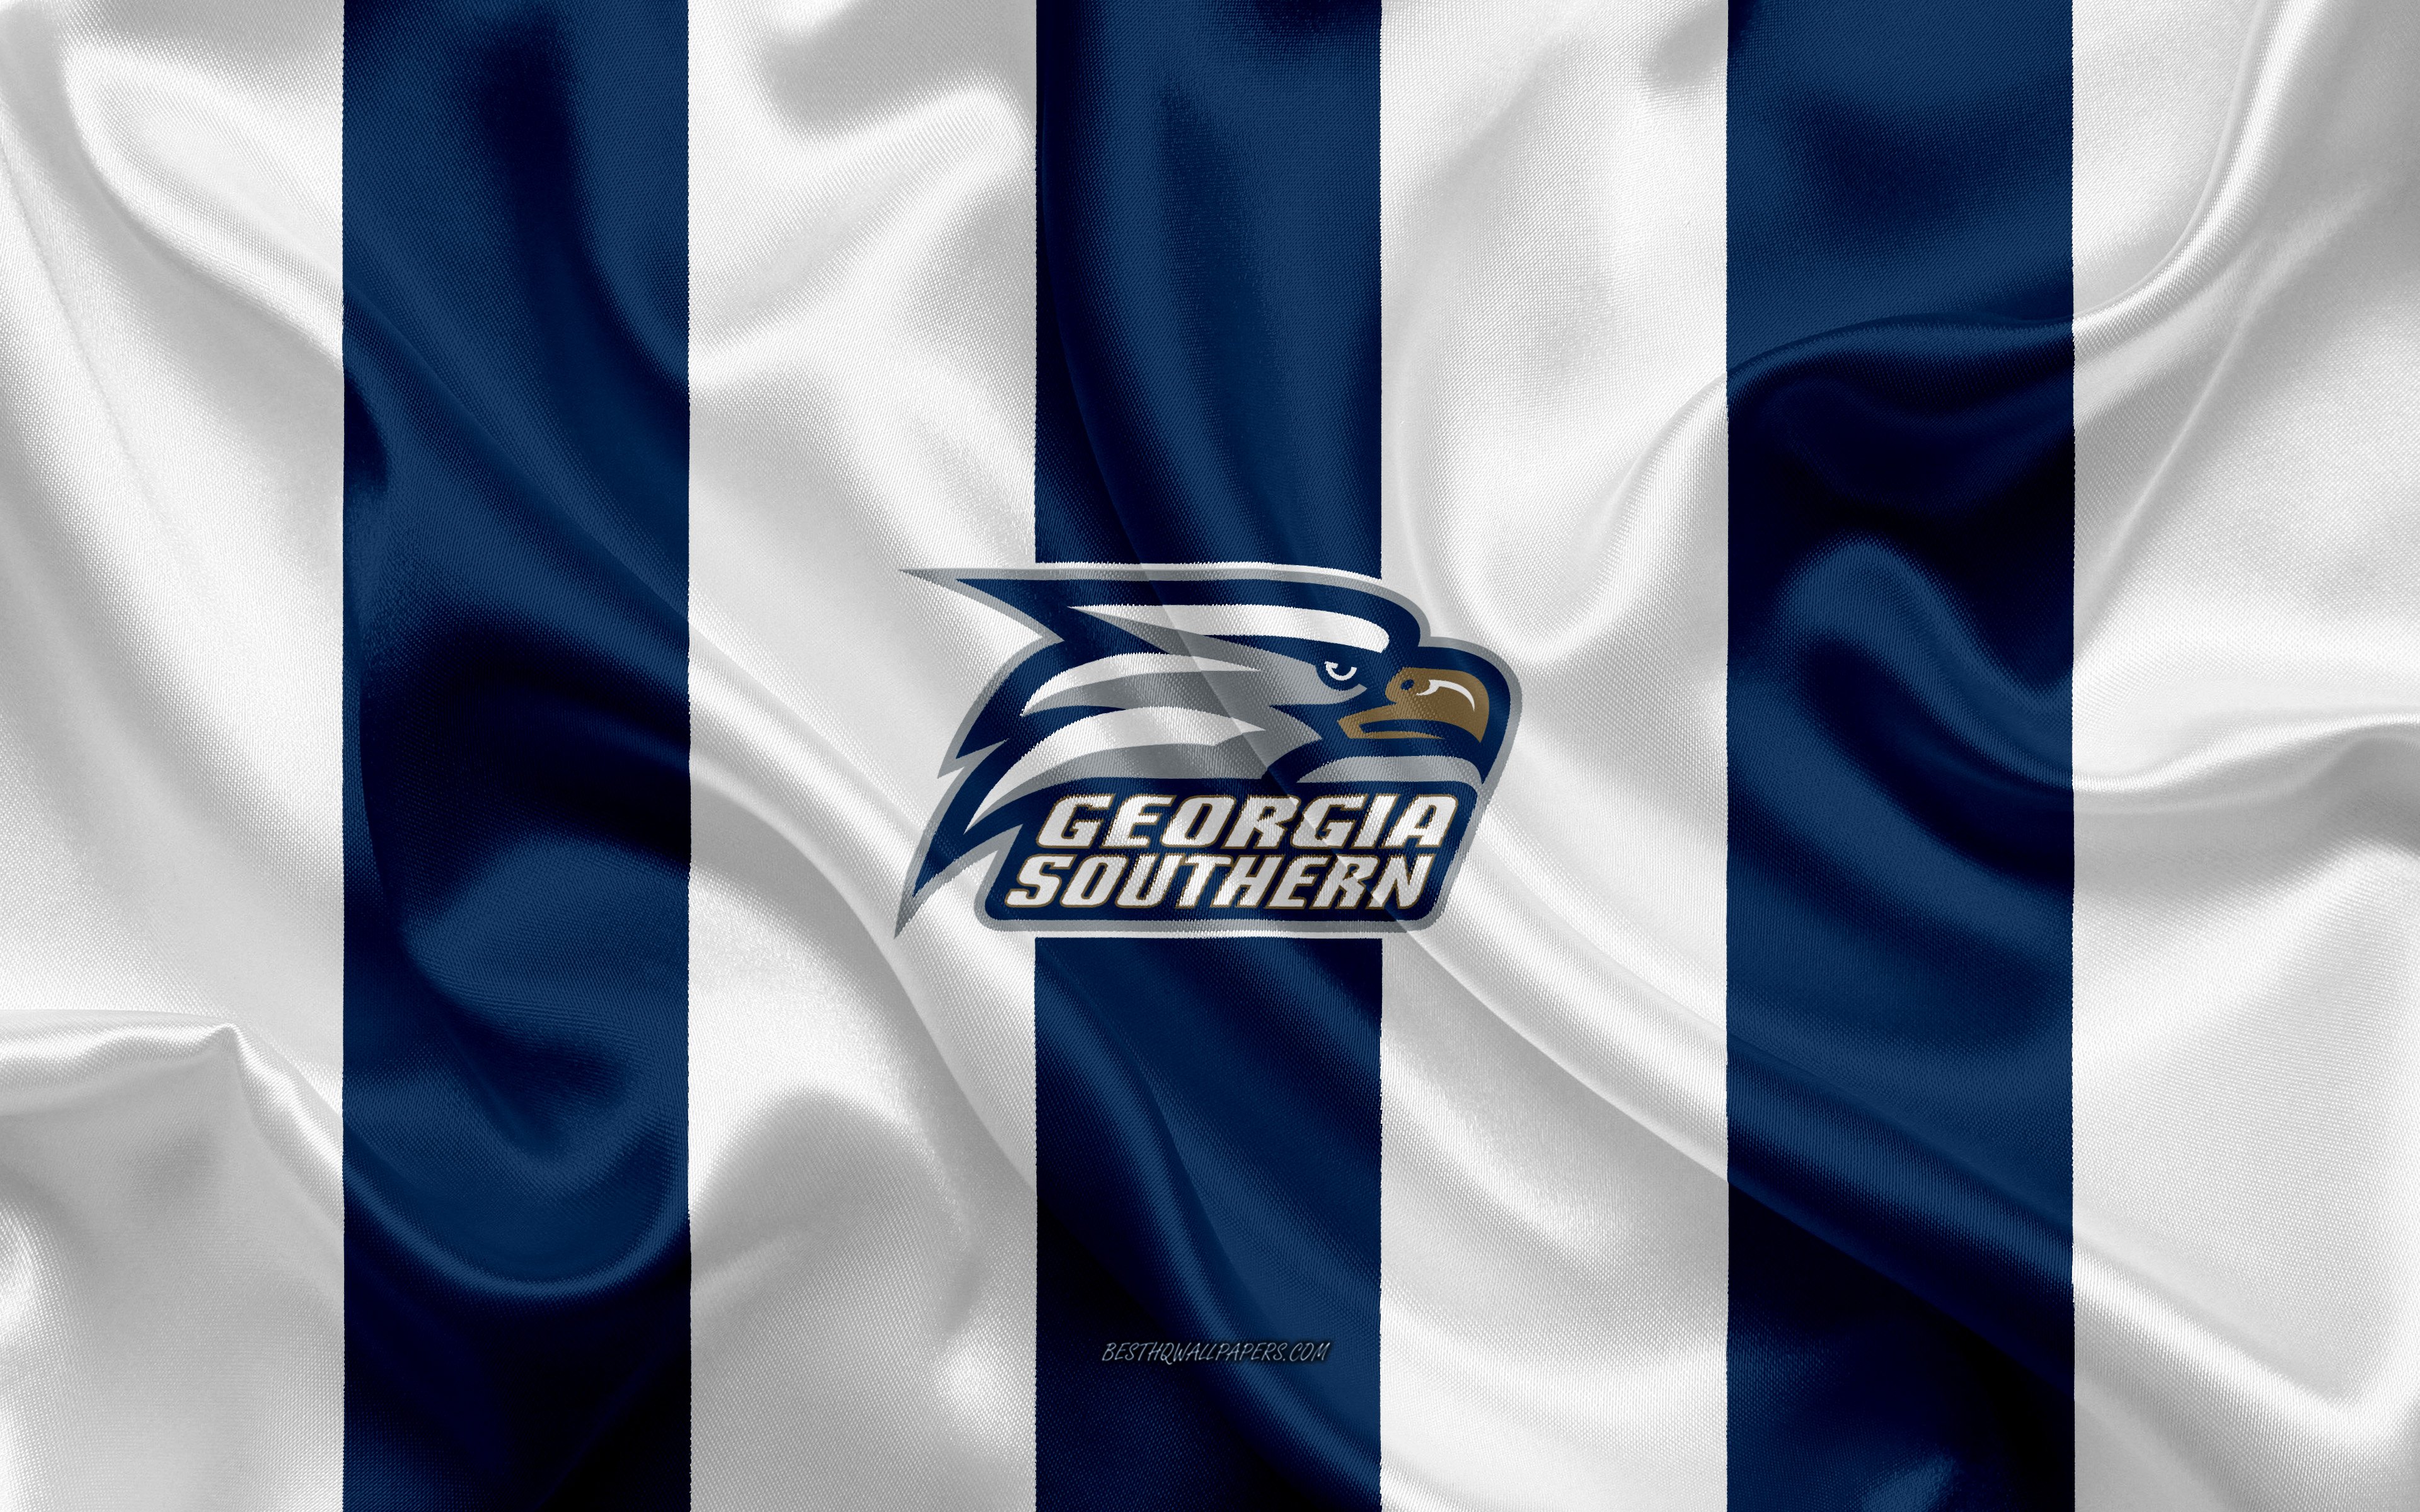 Download wallpaper Georgia Southern Eagles, American football team, emblem, silk flag, blue and white silk texture, NCAA, Georgia Southern Eagles logo, Statesboro, Georgia, USA, American football for desktop with resolution 3840x2400. High